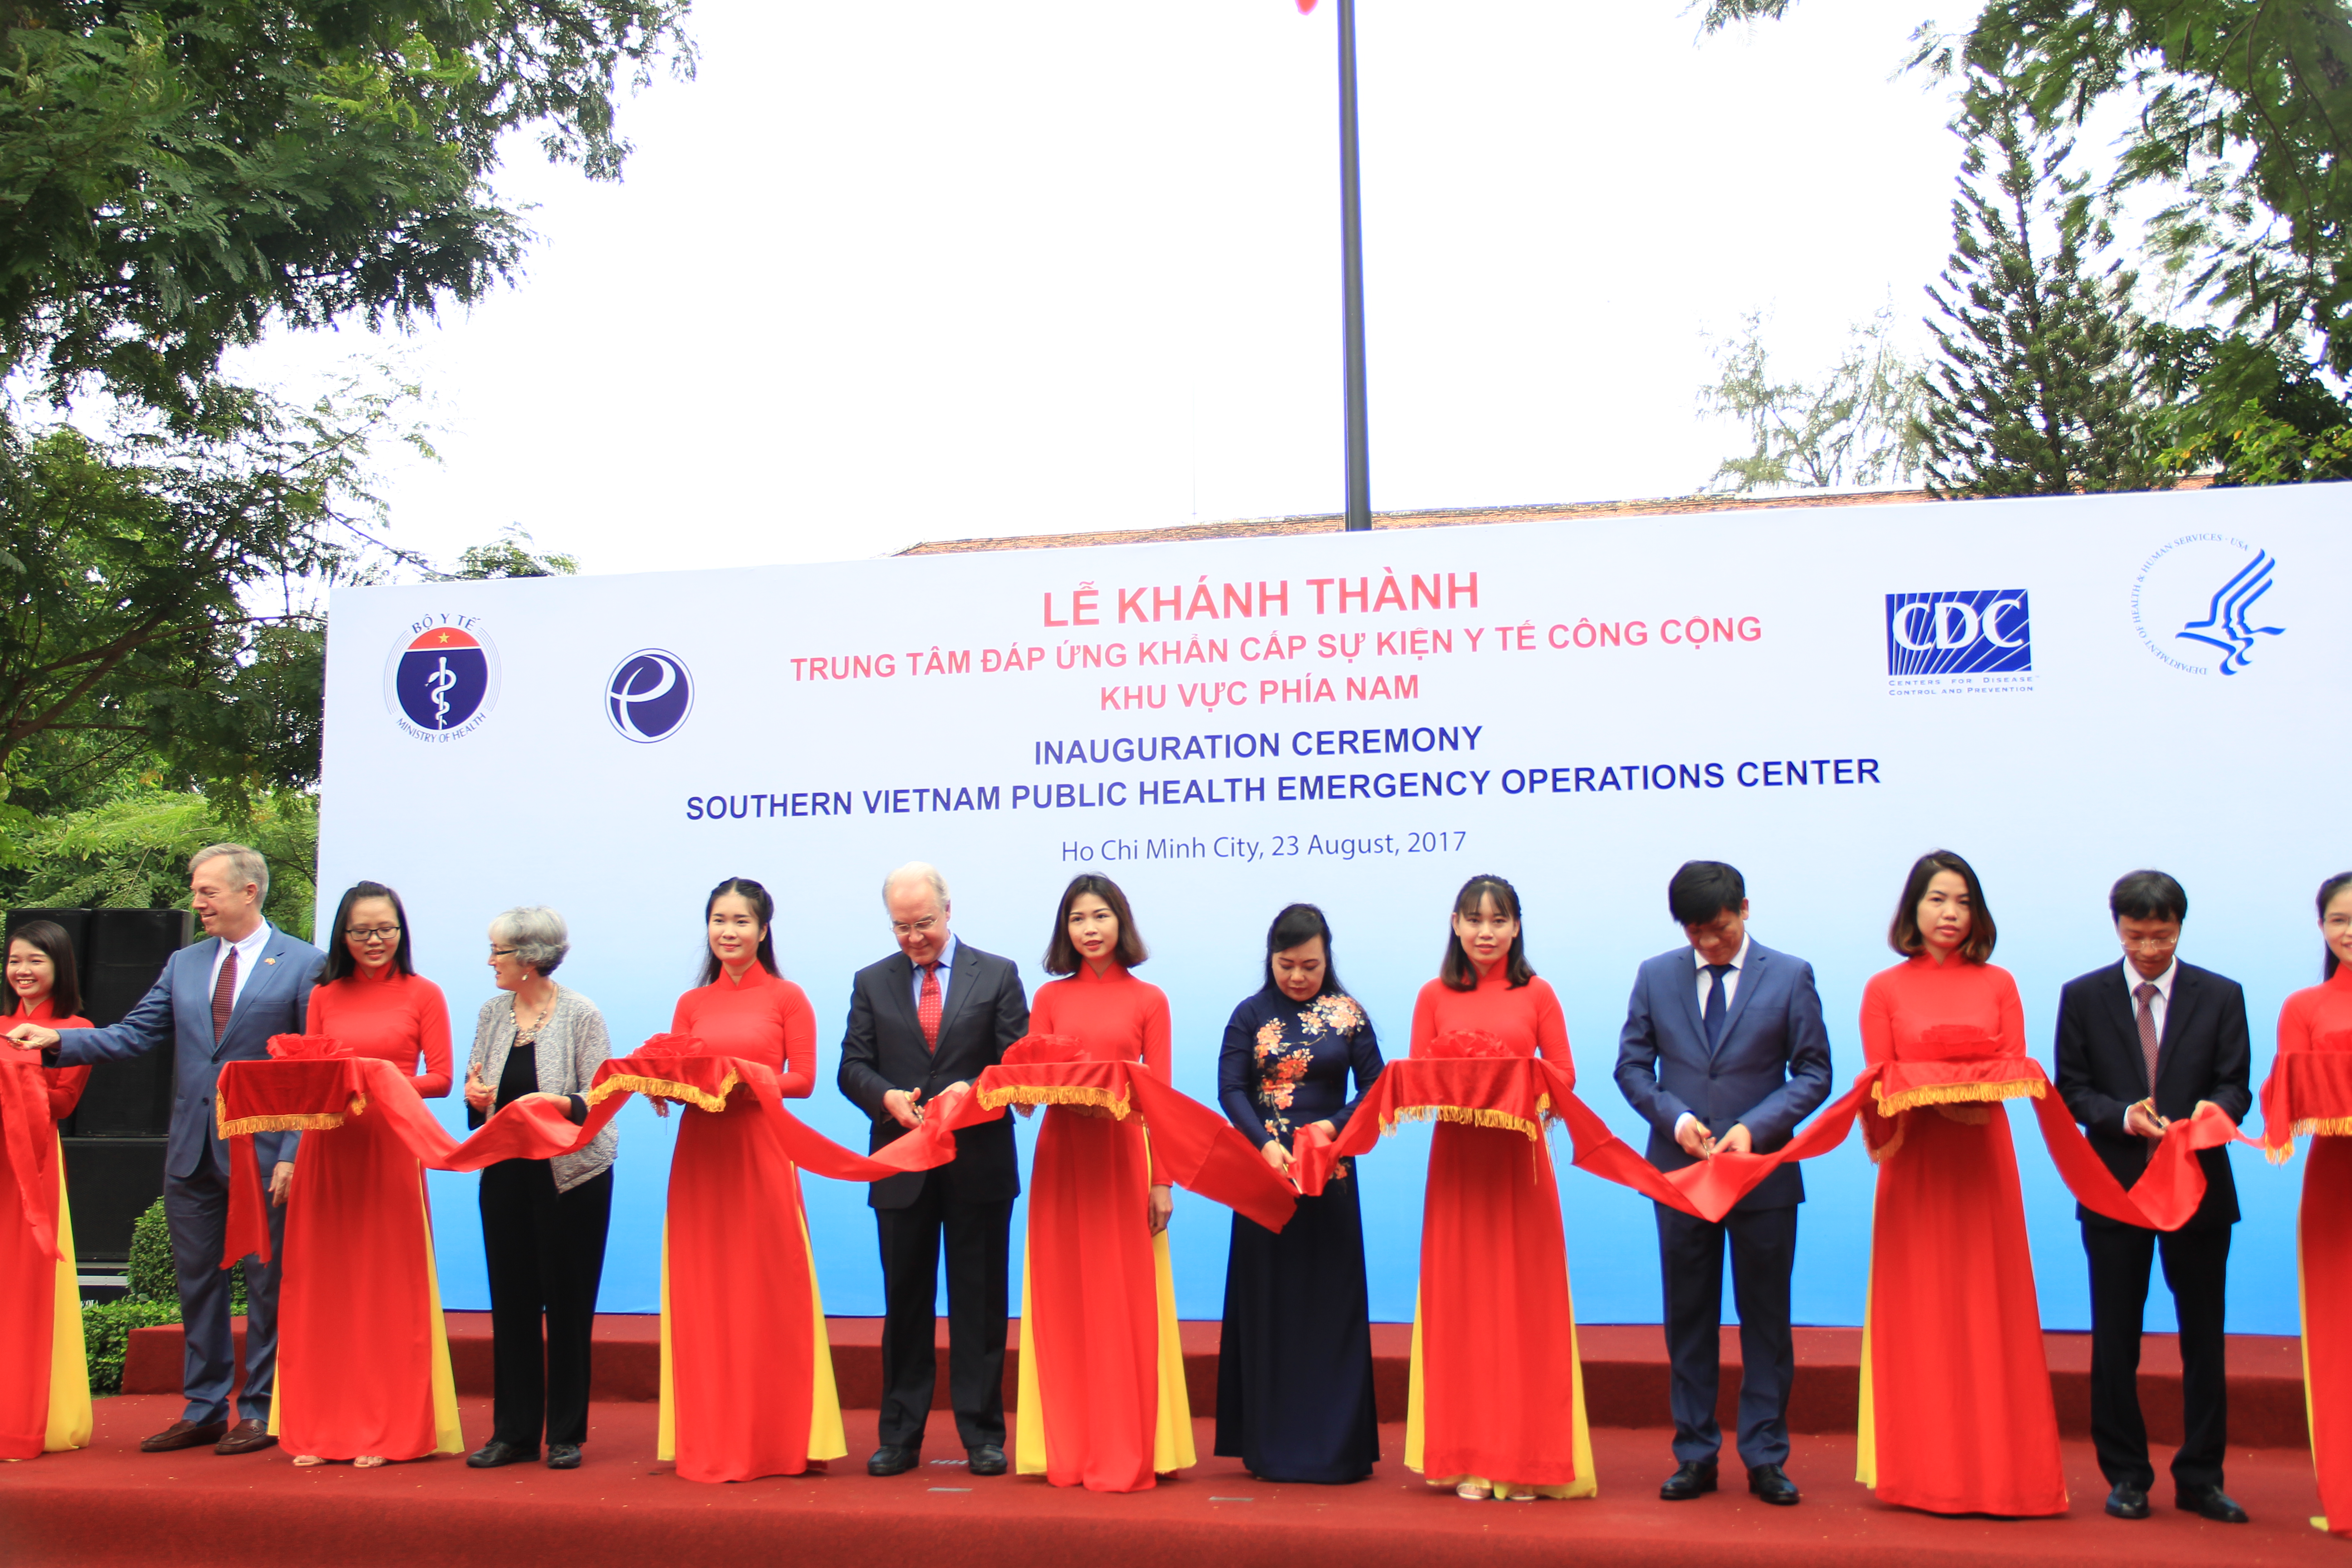 Inauguration Ceremony of the Southern Viet Nam Public Health Emergency Operations Center in the Pasteur Institute, Ho Chi Minh City